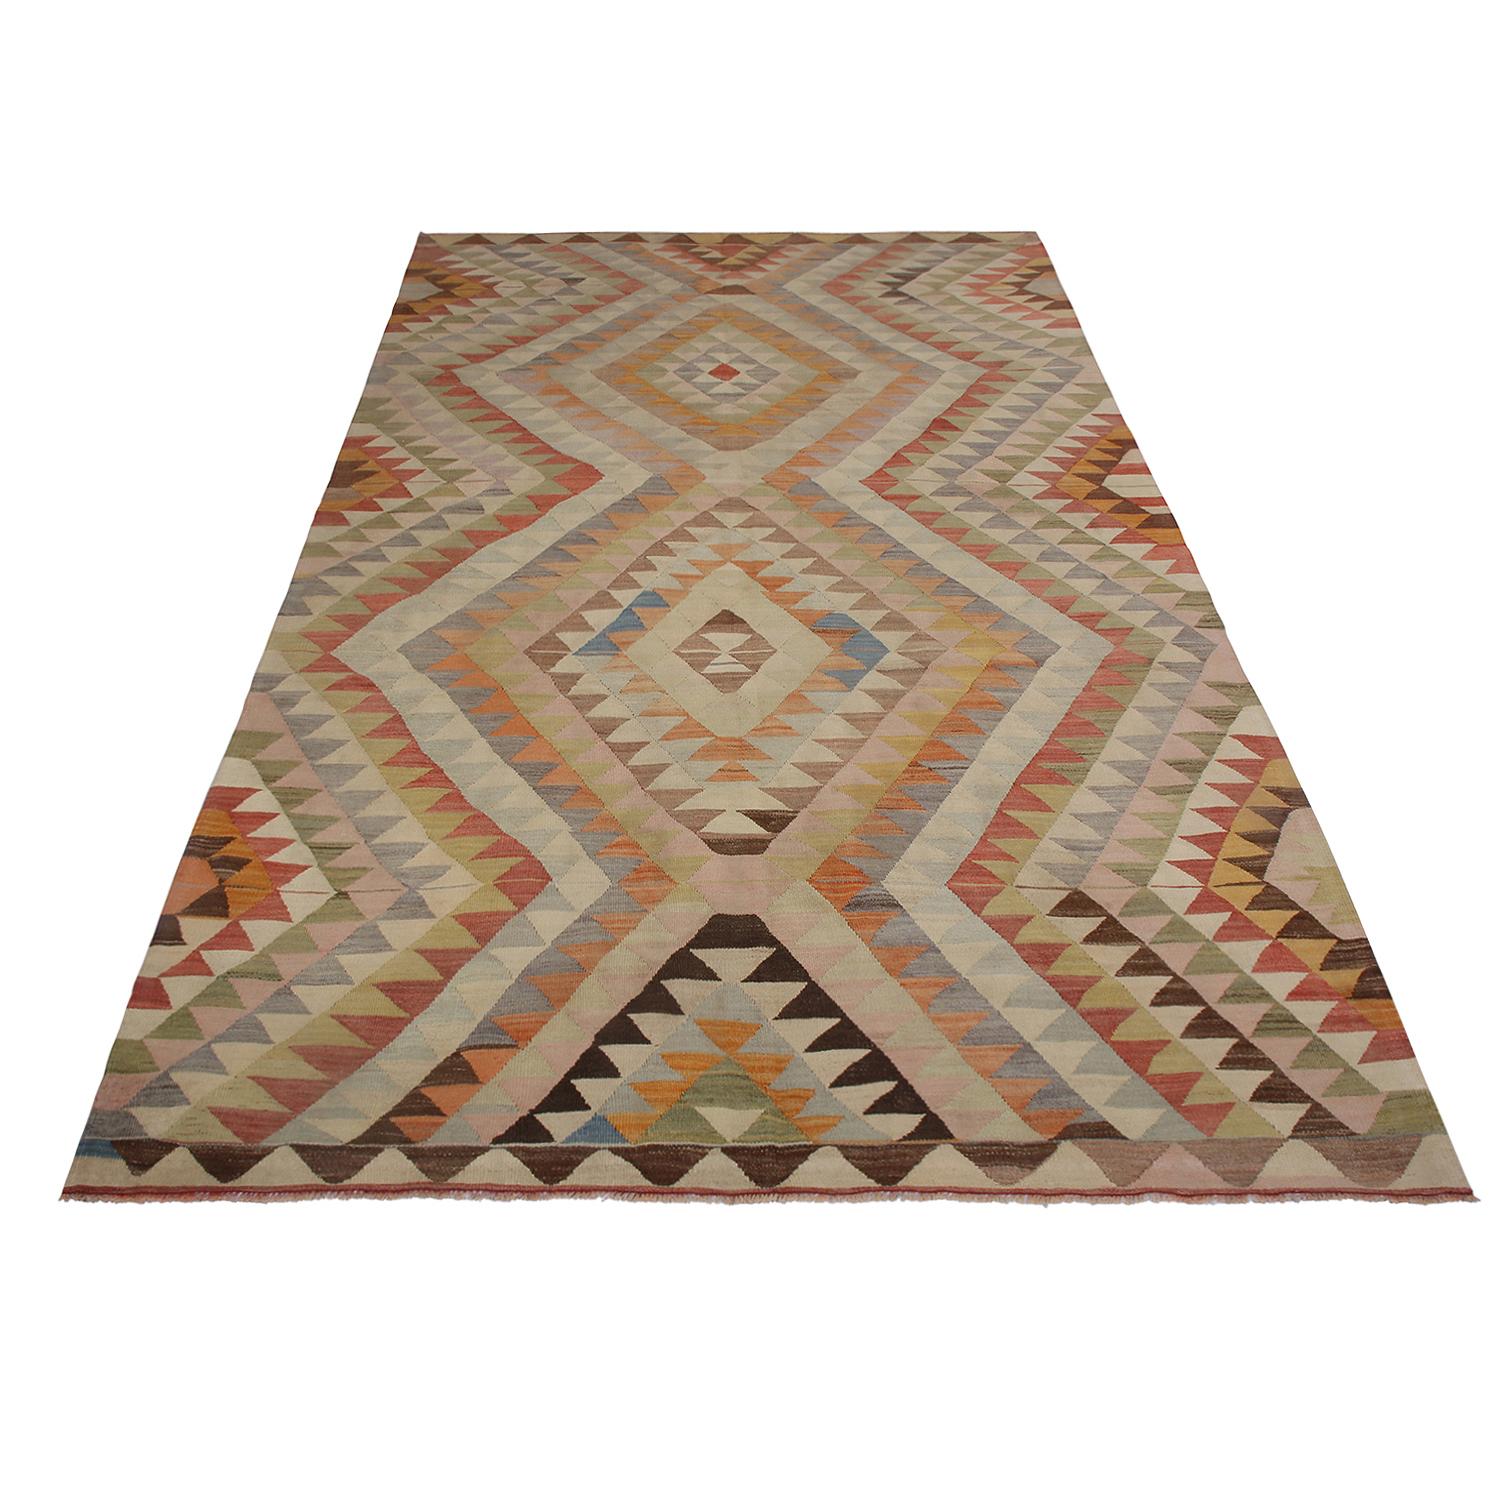 Flat-woven in Turkey originating between 1950-1960, this vintage midcentury tribal Kilim hails from the province of Afyon, enjoying the marriage of an idyllic diamond pattern with unique cream-pink, beige and blue hues. Further complemented by